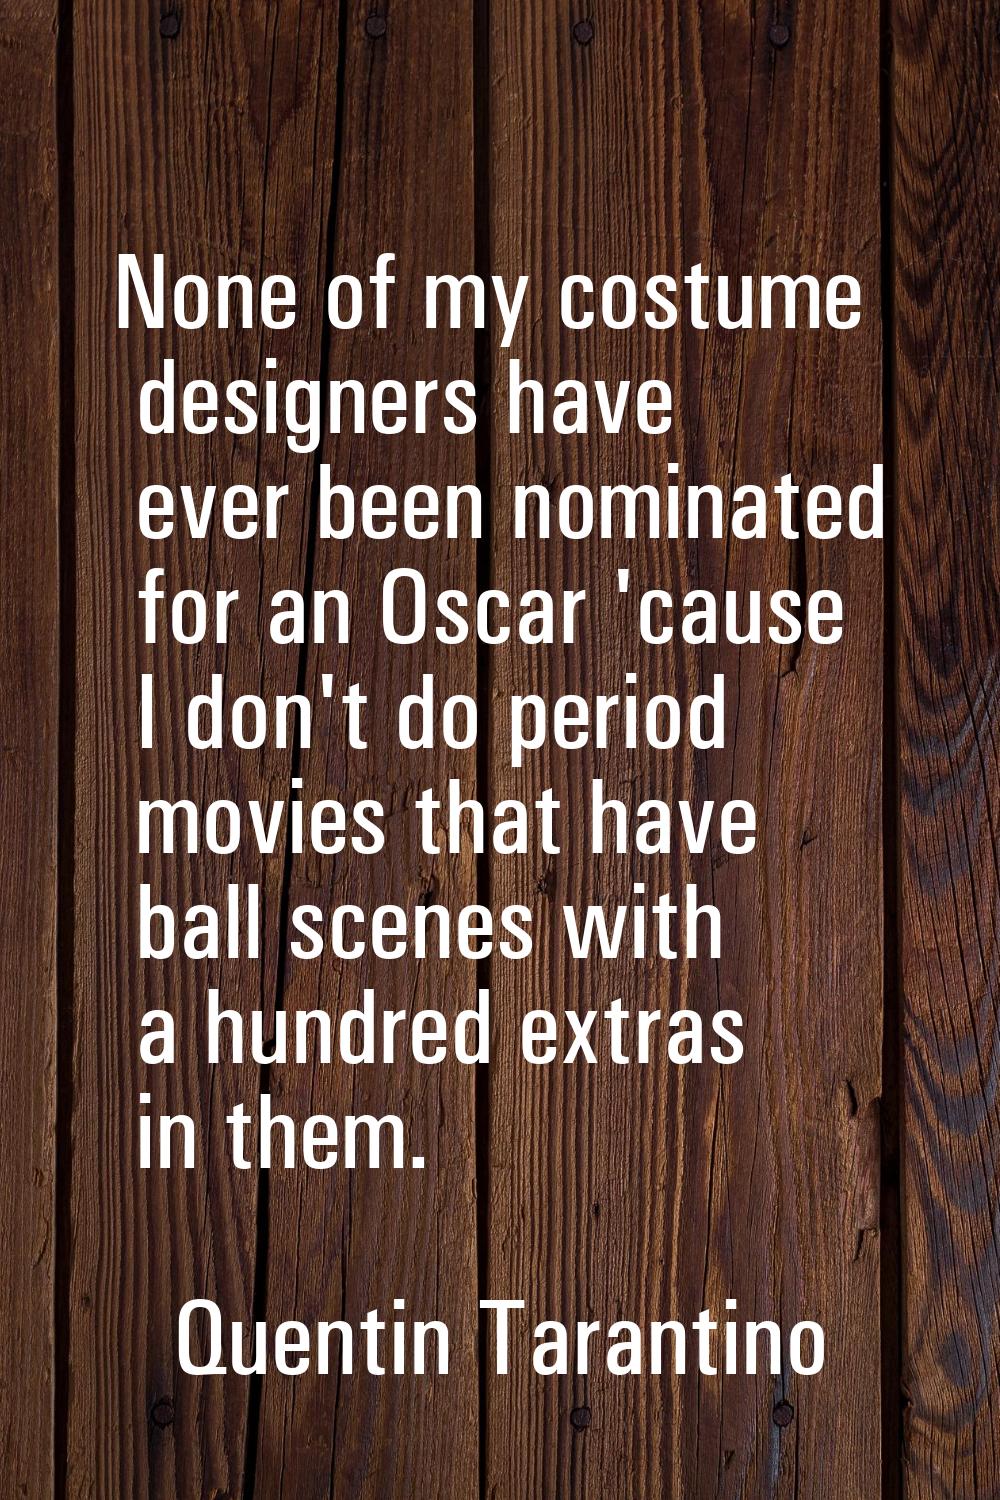 None of my costume designers have ever been nominated for an Oscar 'cause I don't do period movies 